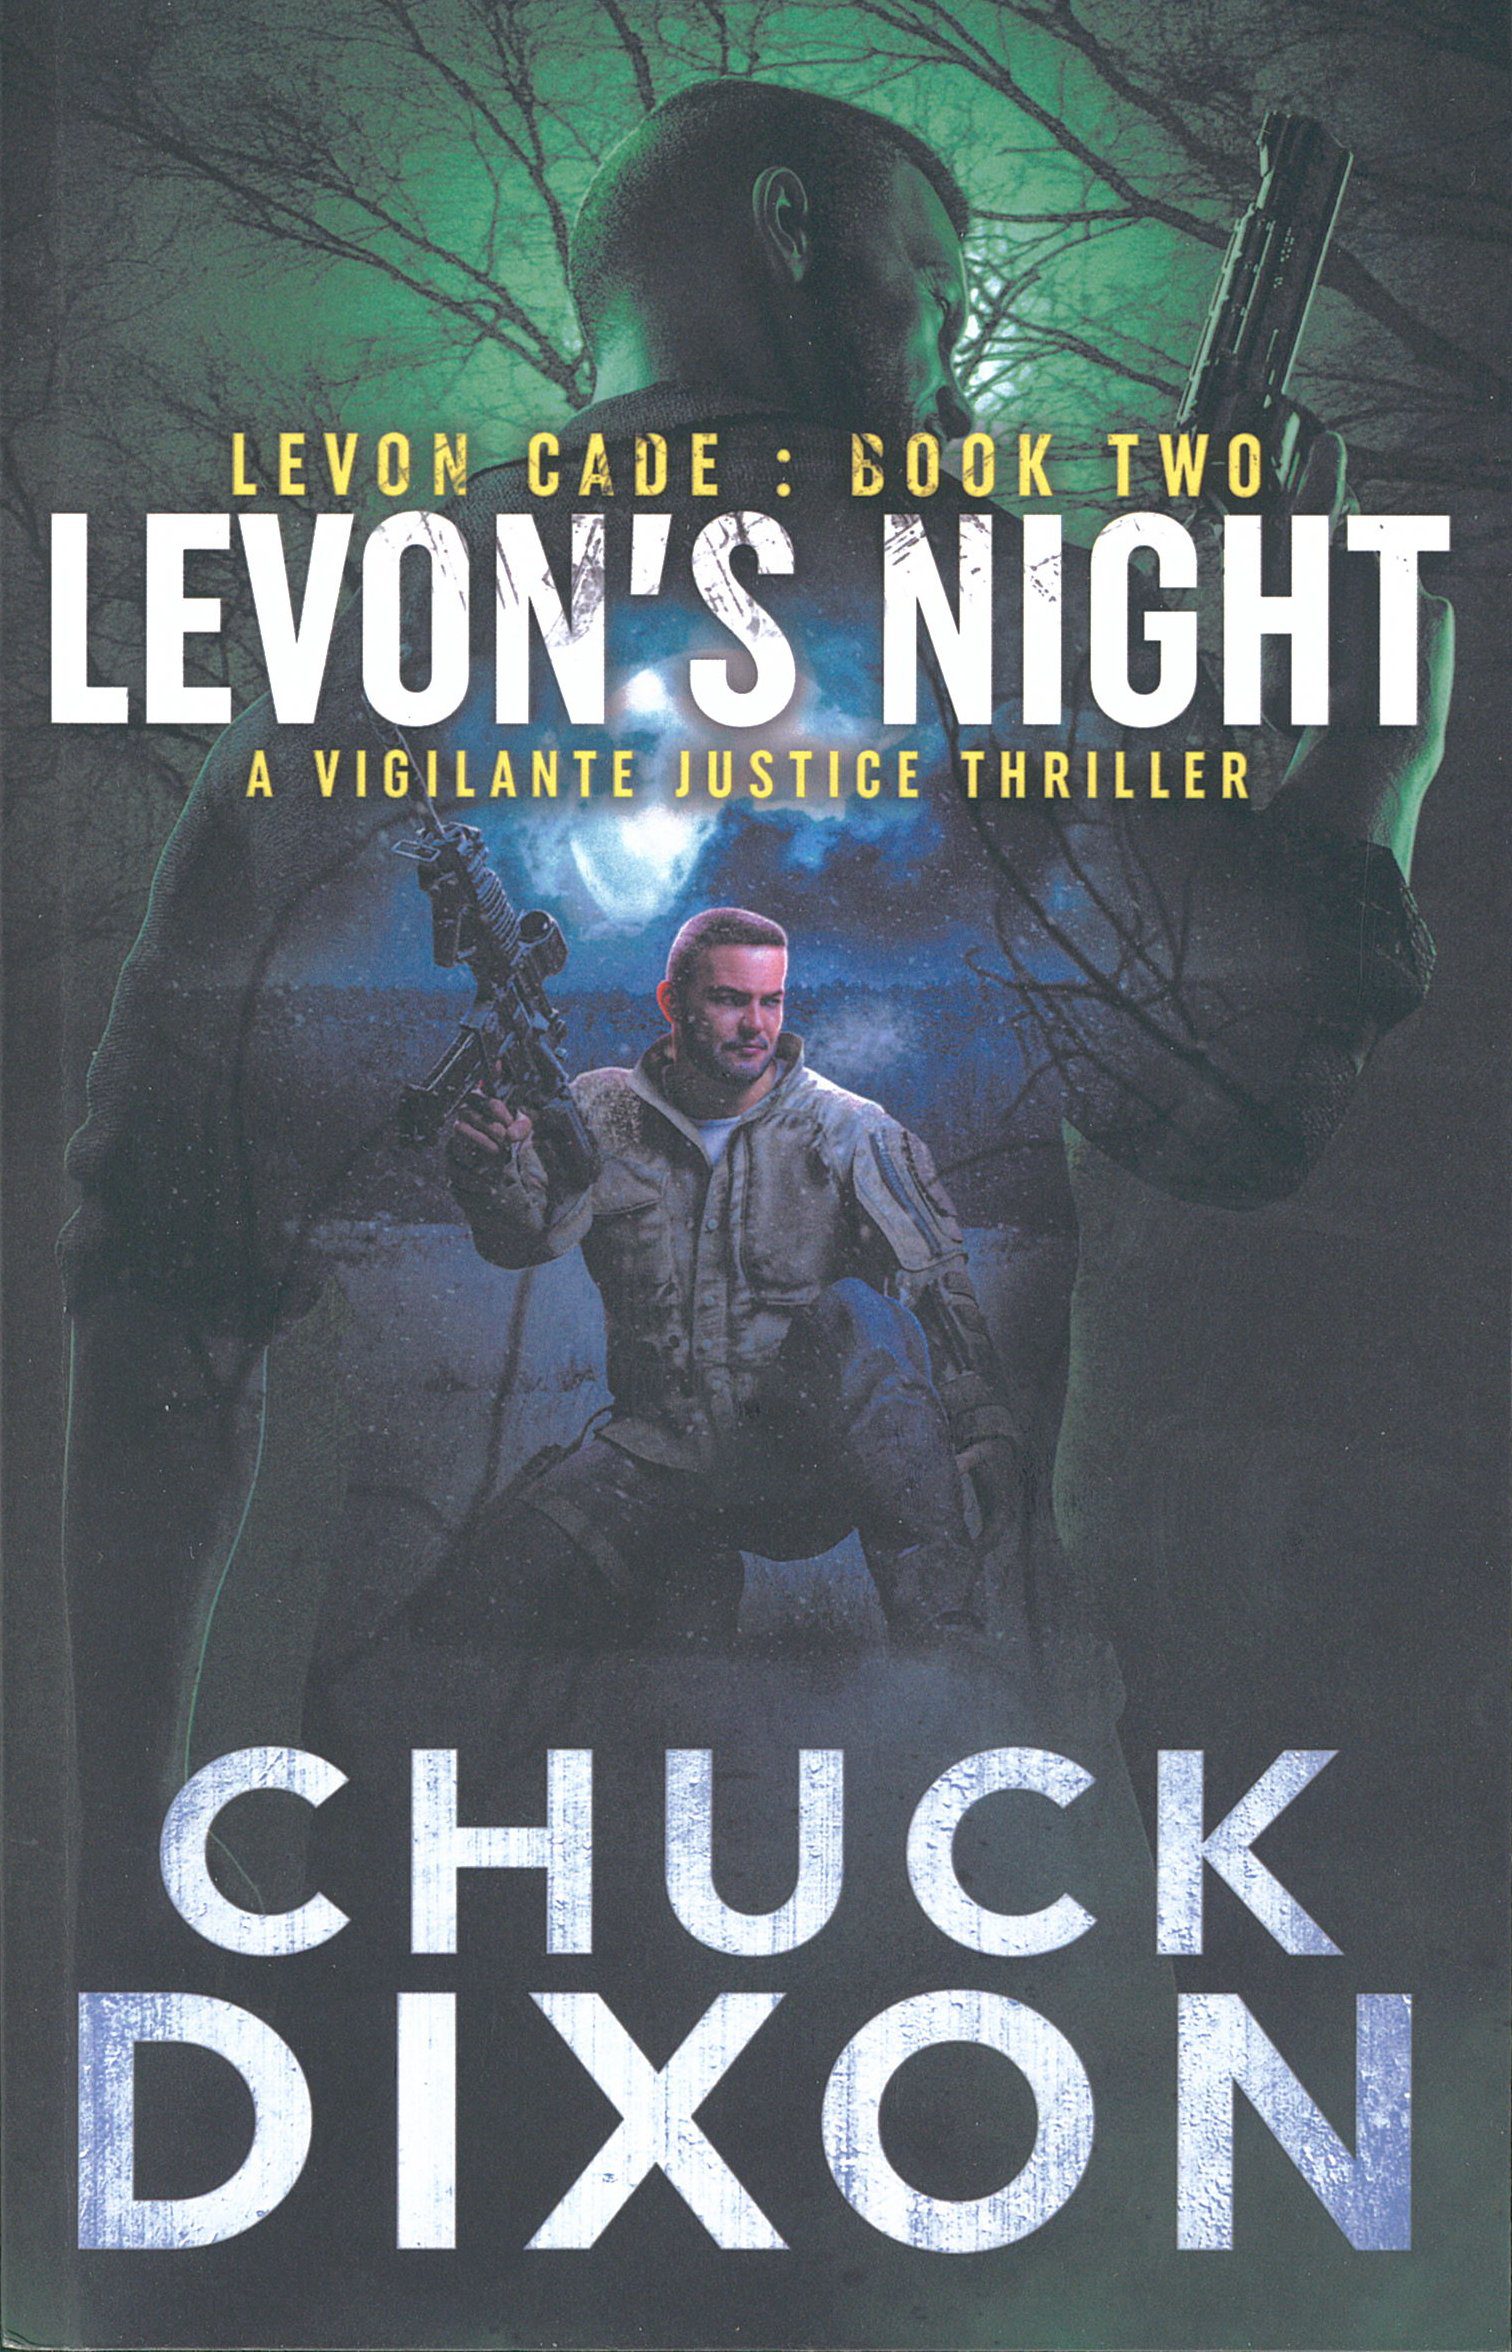 Levon's Night Book Review By Ron Fortier